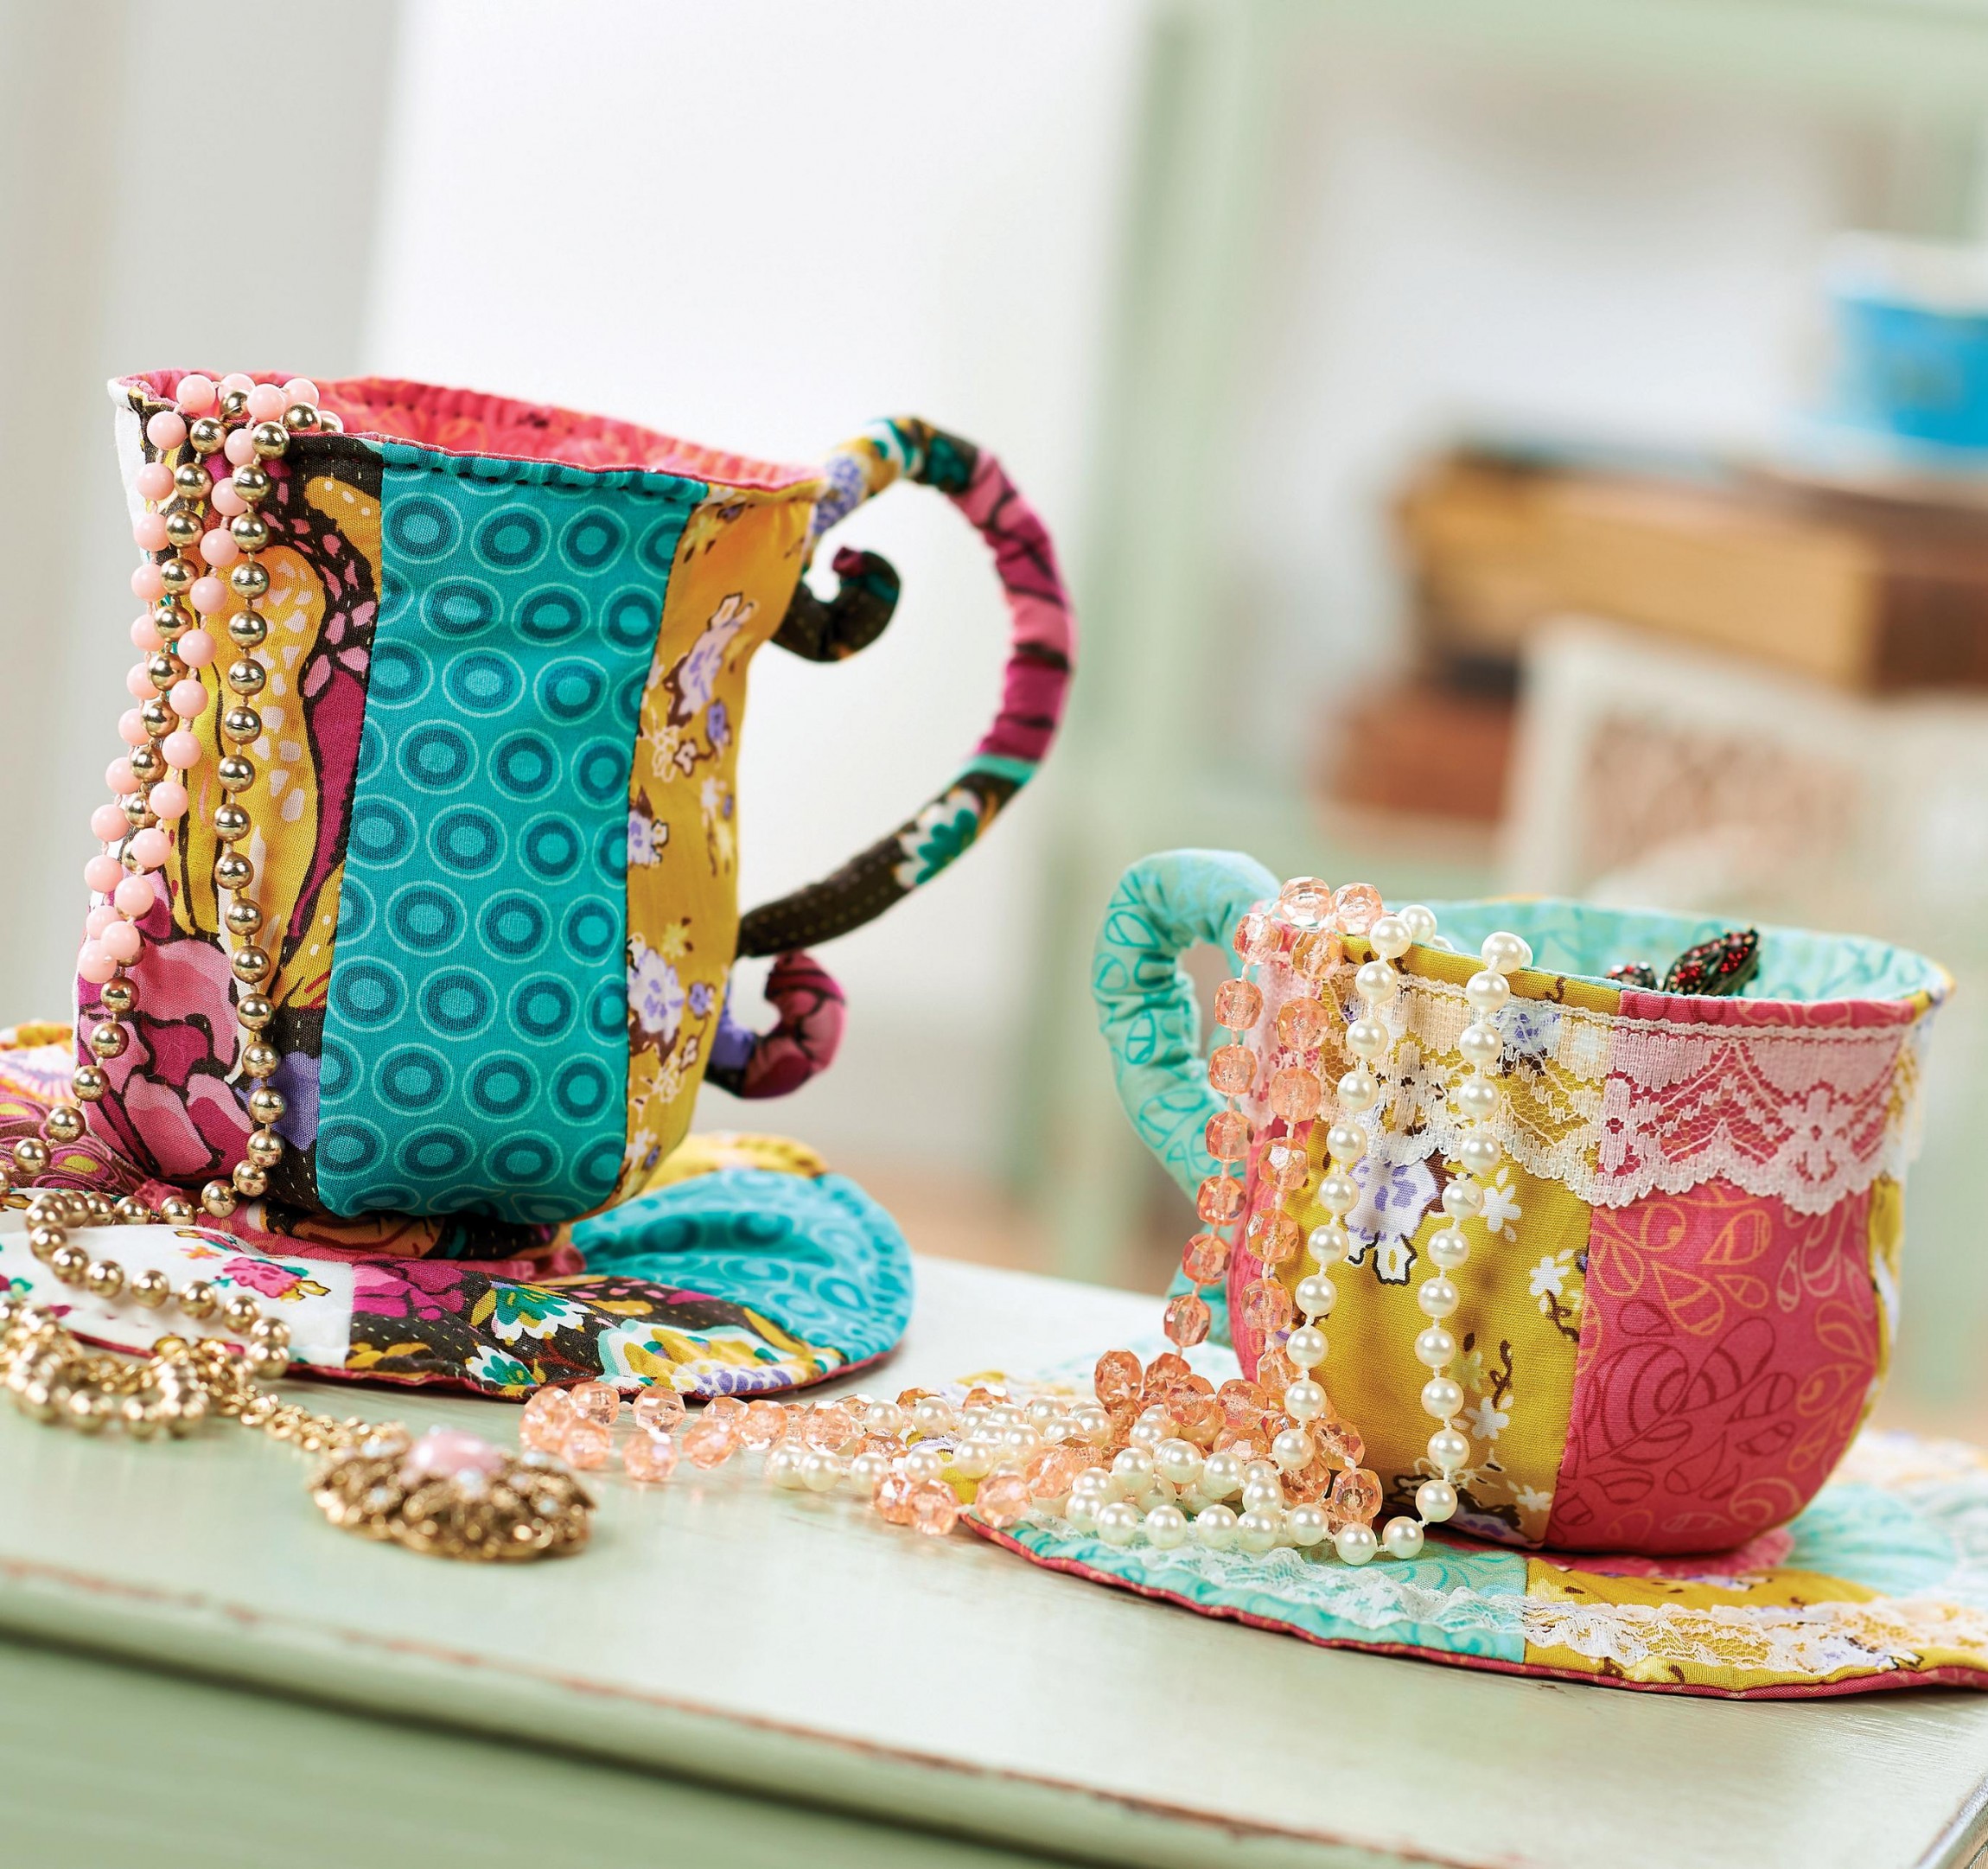 Fabric Storage Patchwork Teacups - Free sewing patterns - Sew Magazine